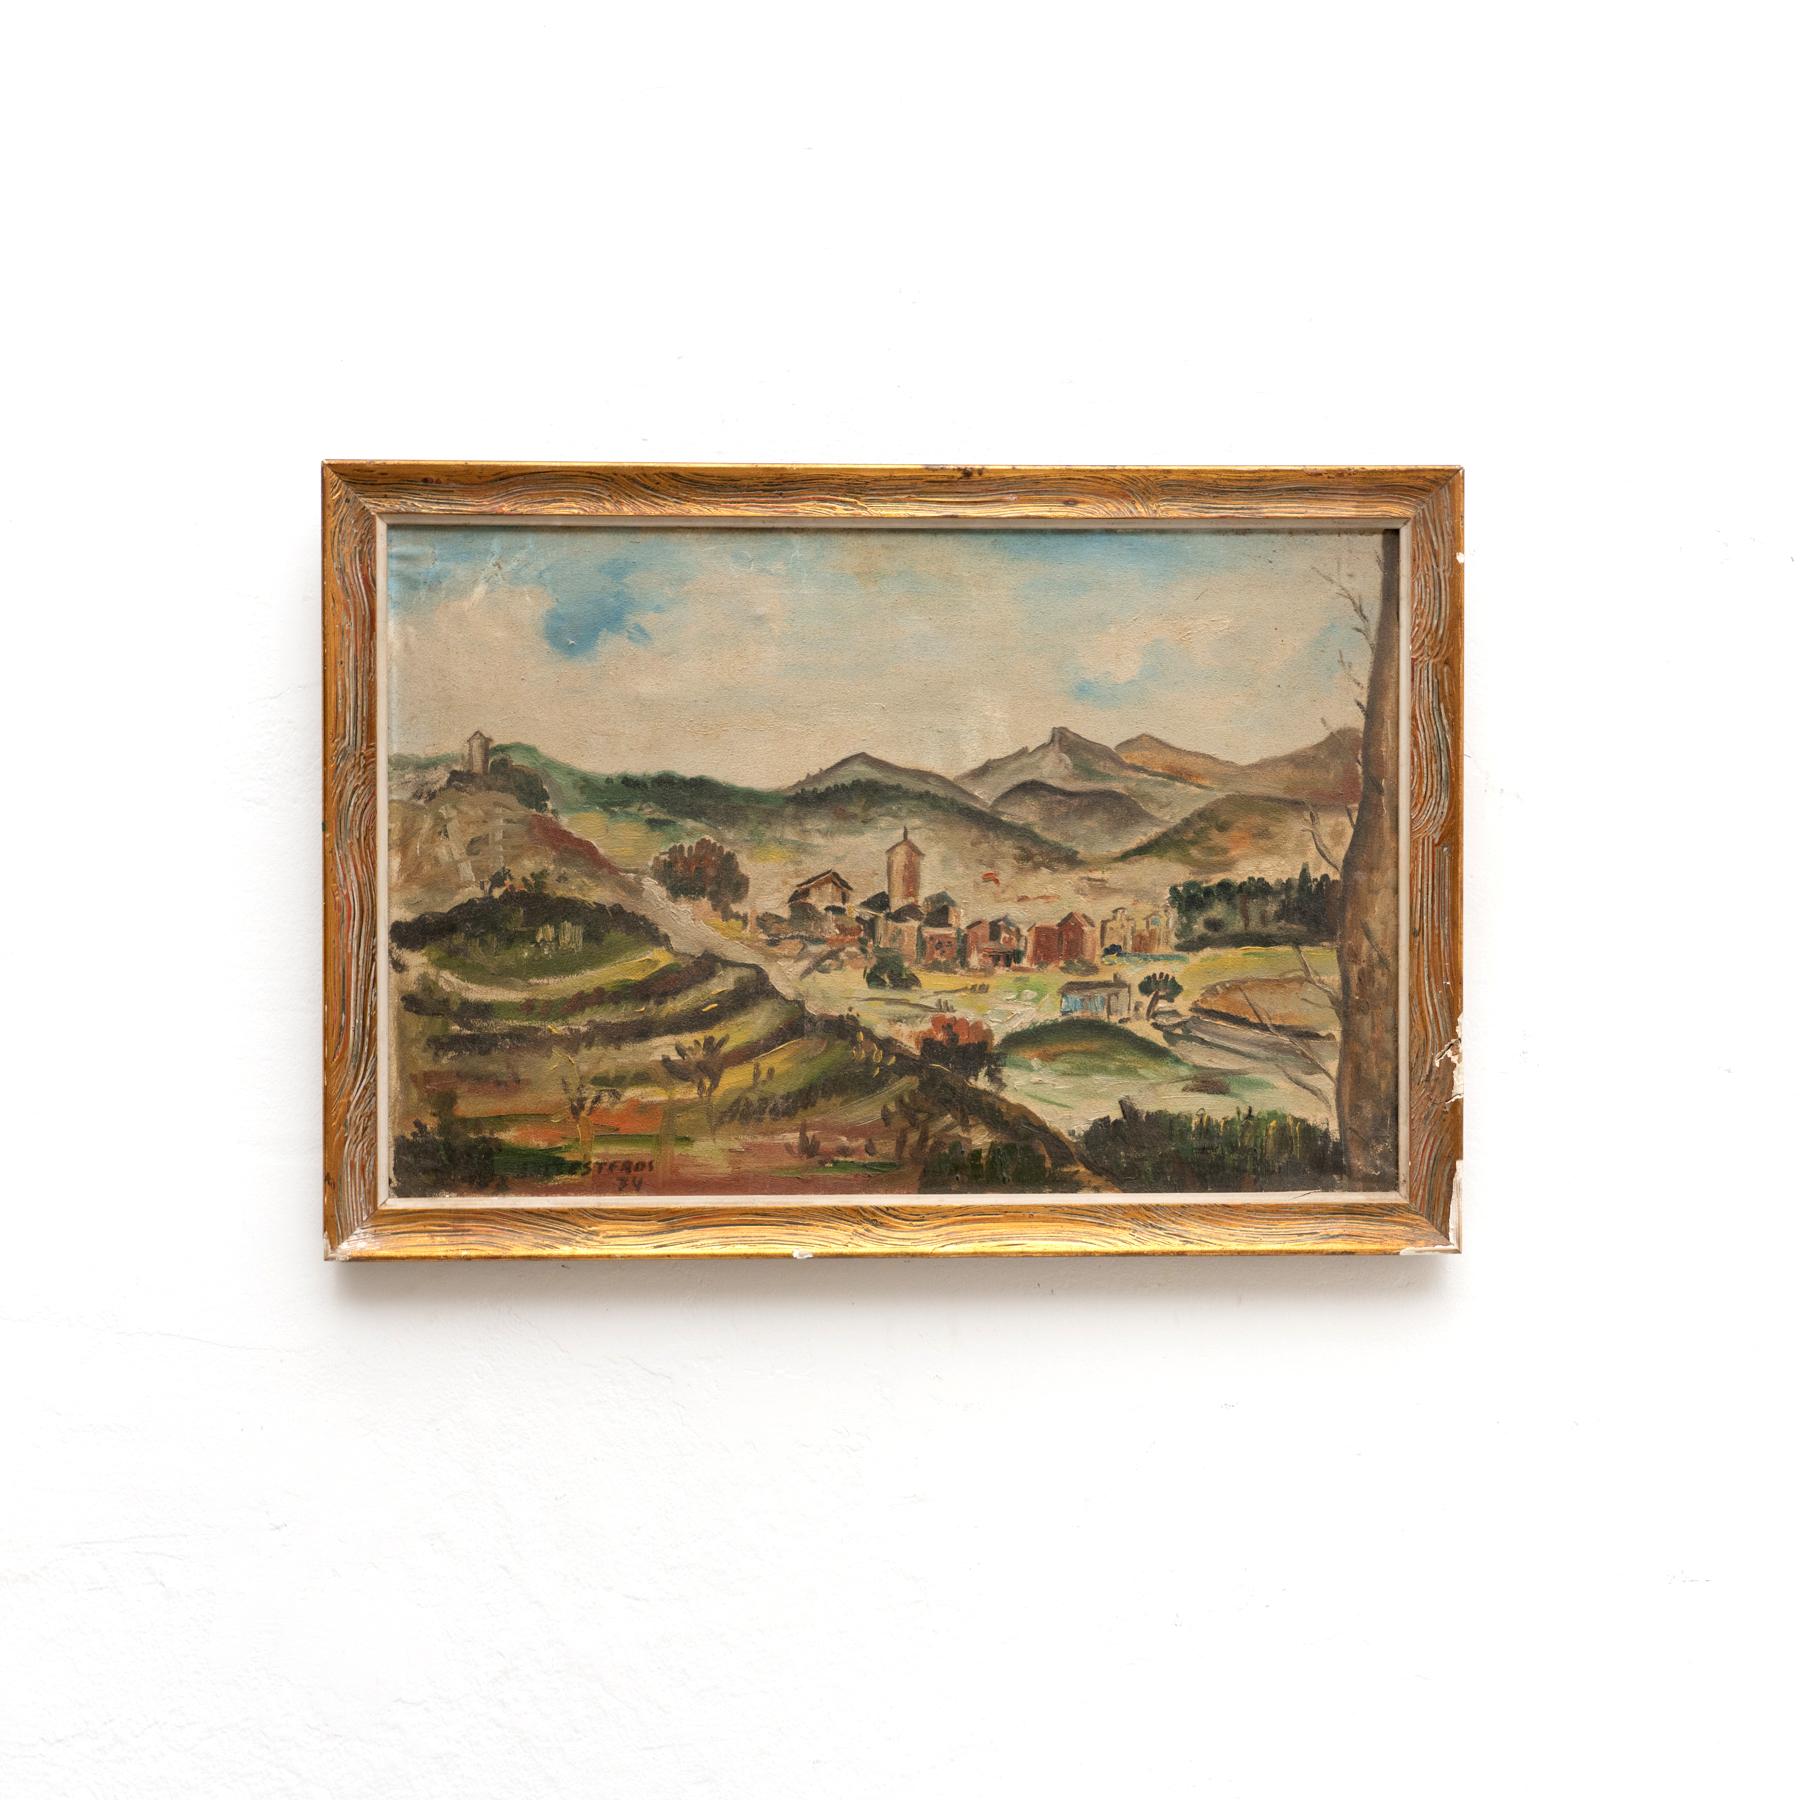 Painting by Ballesteros, 1974.

Oil on canvas. Handsigned and dated.

In original condition, with some visible signs of previous use and age, preserving a beautiful patina.
The frame is a bit damaged.

Materials:
Oil on canvas.